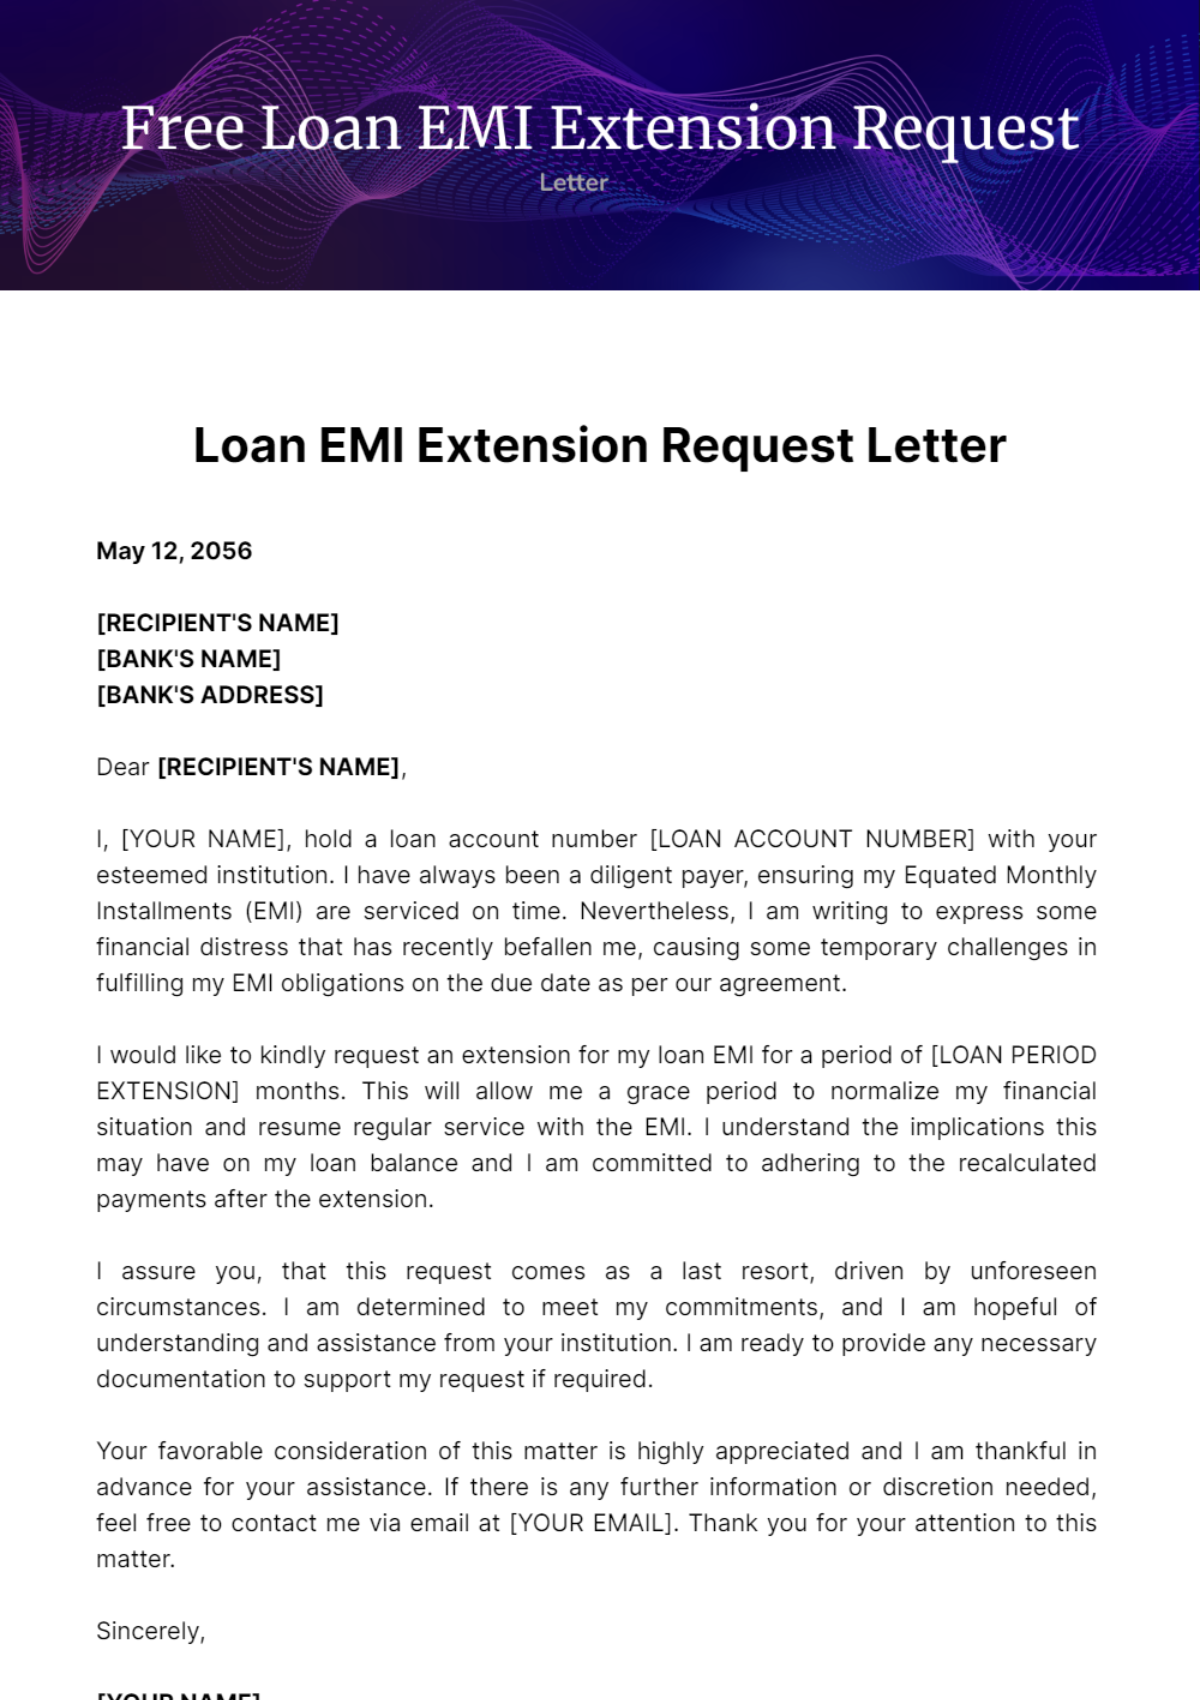 Free Loan EMI Extension Request Letter Template